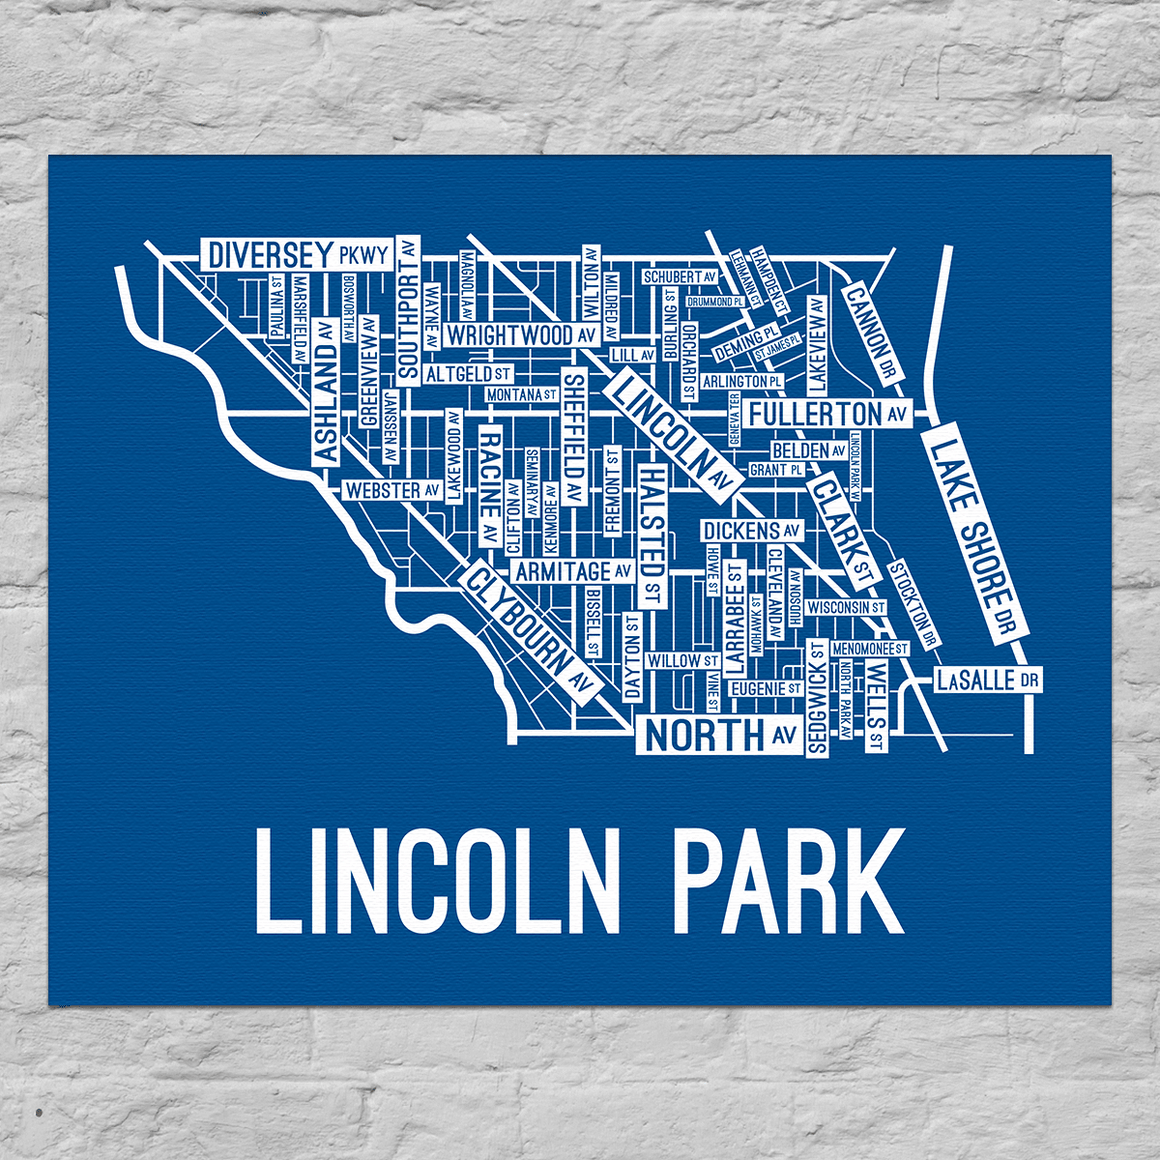 Lincoln Park, Chicago Street Map Canvas